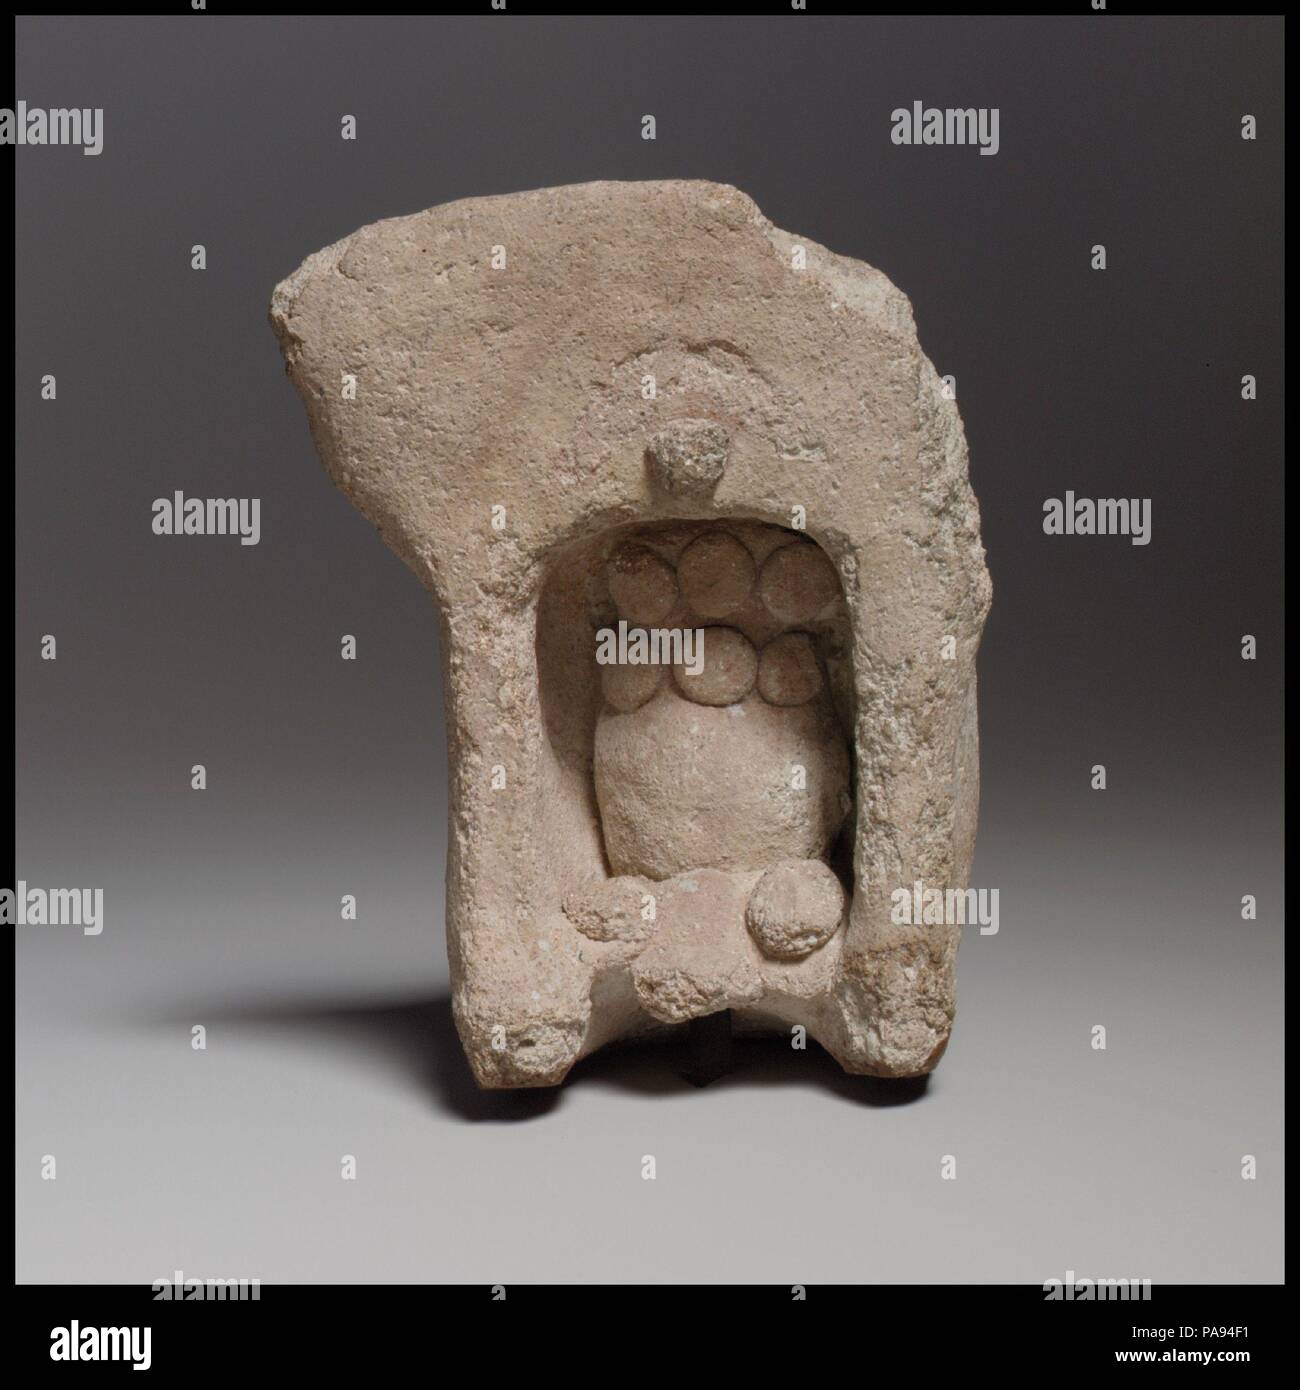 Terracotta model of a shrine. Culture: Cypriot. Dimensions: H. 3 7/8 in. (9.9 cm). Date: ca. 600-480 B.C..  The shrine contains a nonfigural representation, known as a betyl. The crescent and disk above the opening are symbols of the goddess Astarte, to whom the model may have been dedicated. Museum: Metropolitan Museum of Art, New York, USA. Stock Photo